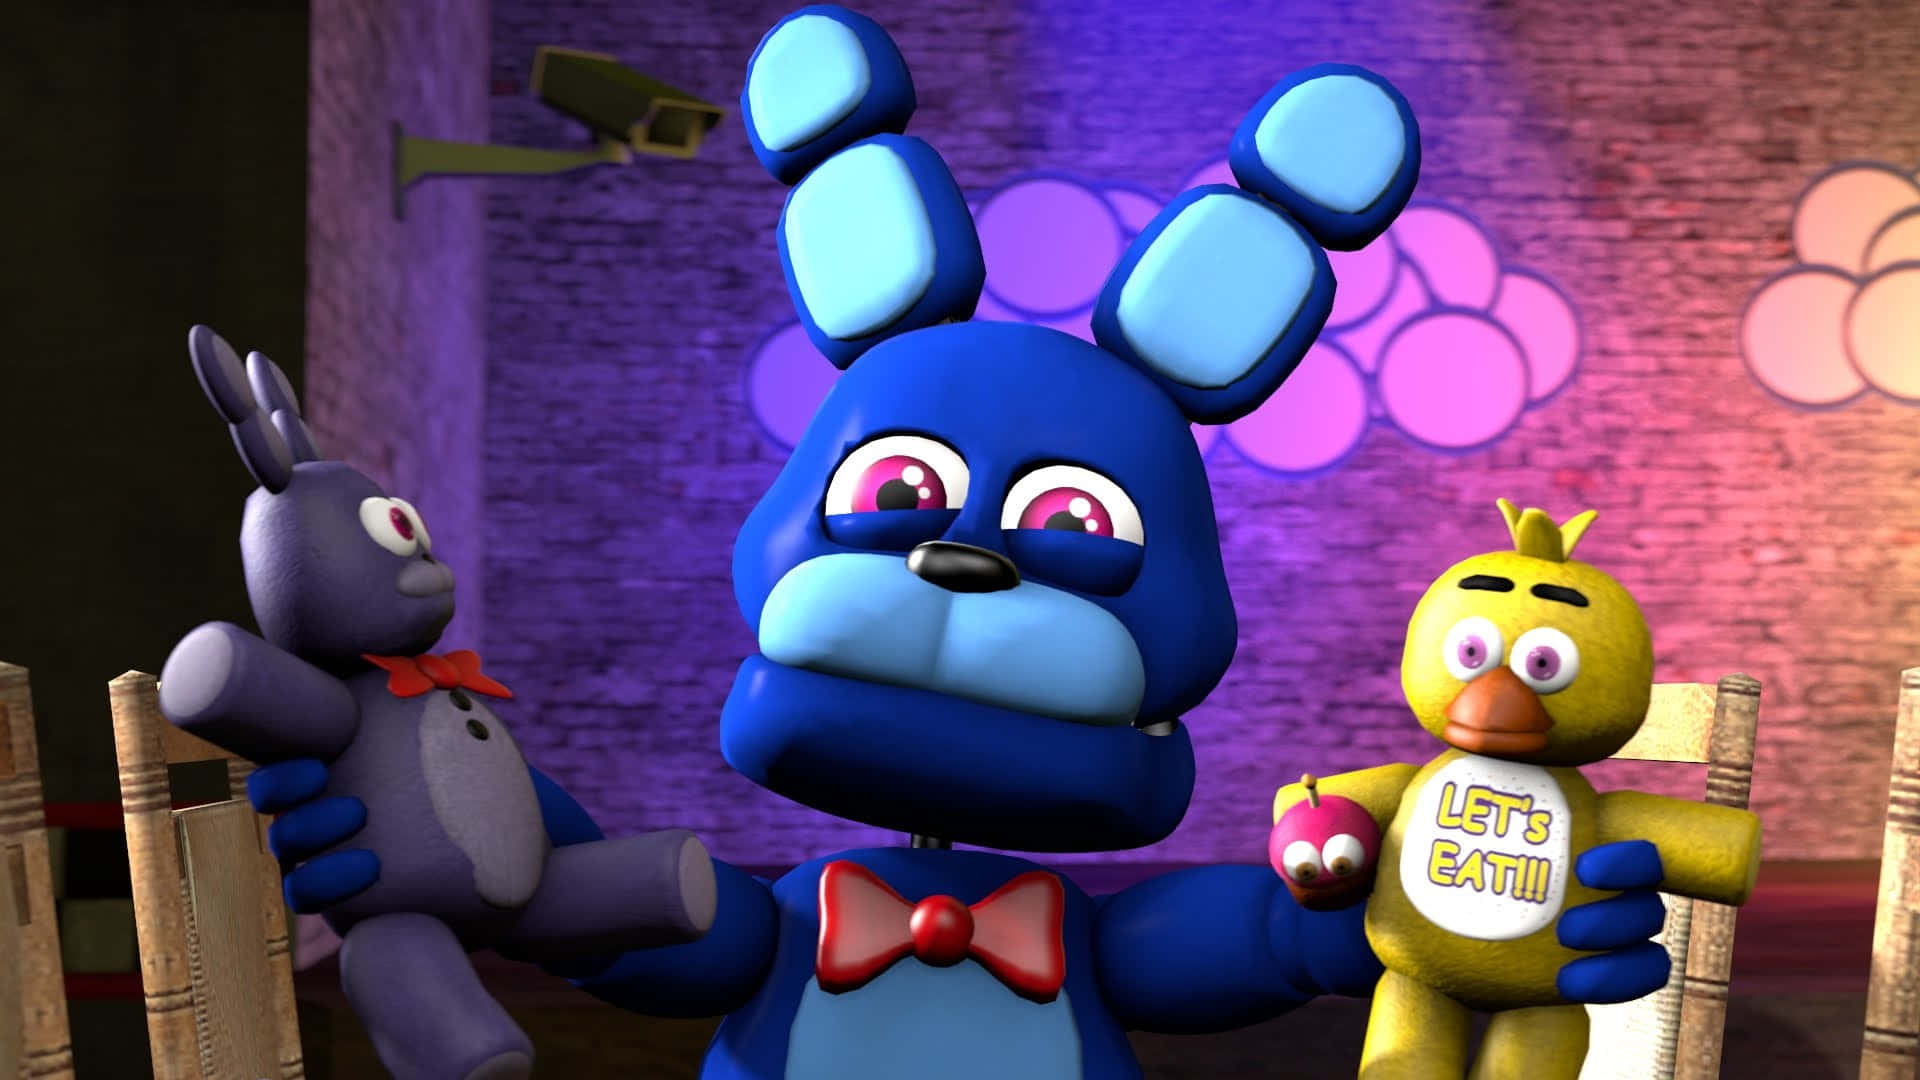 "Come join the Five Nights at Freddy's family!" Wallpaper